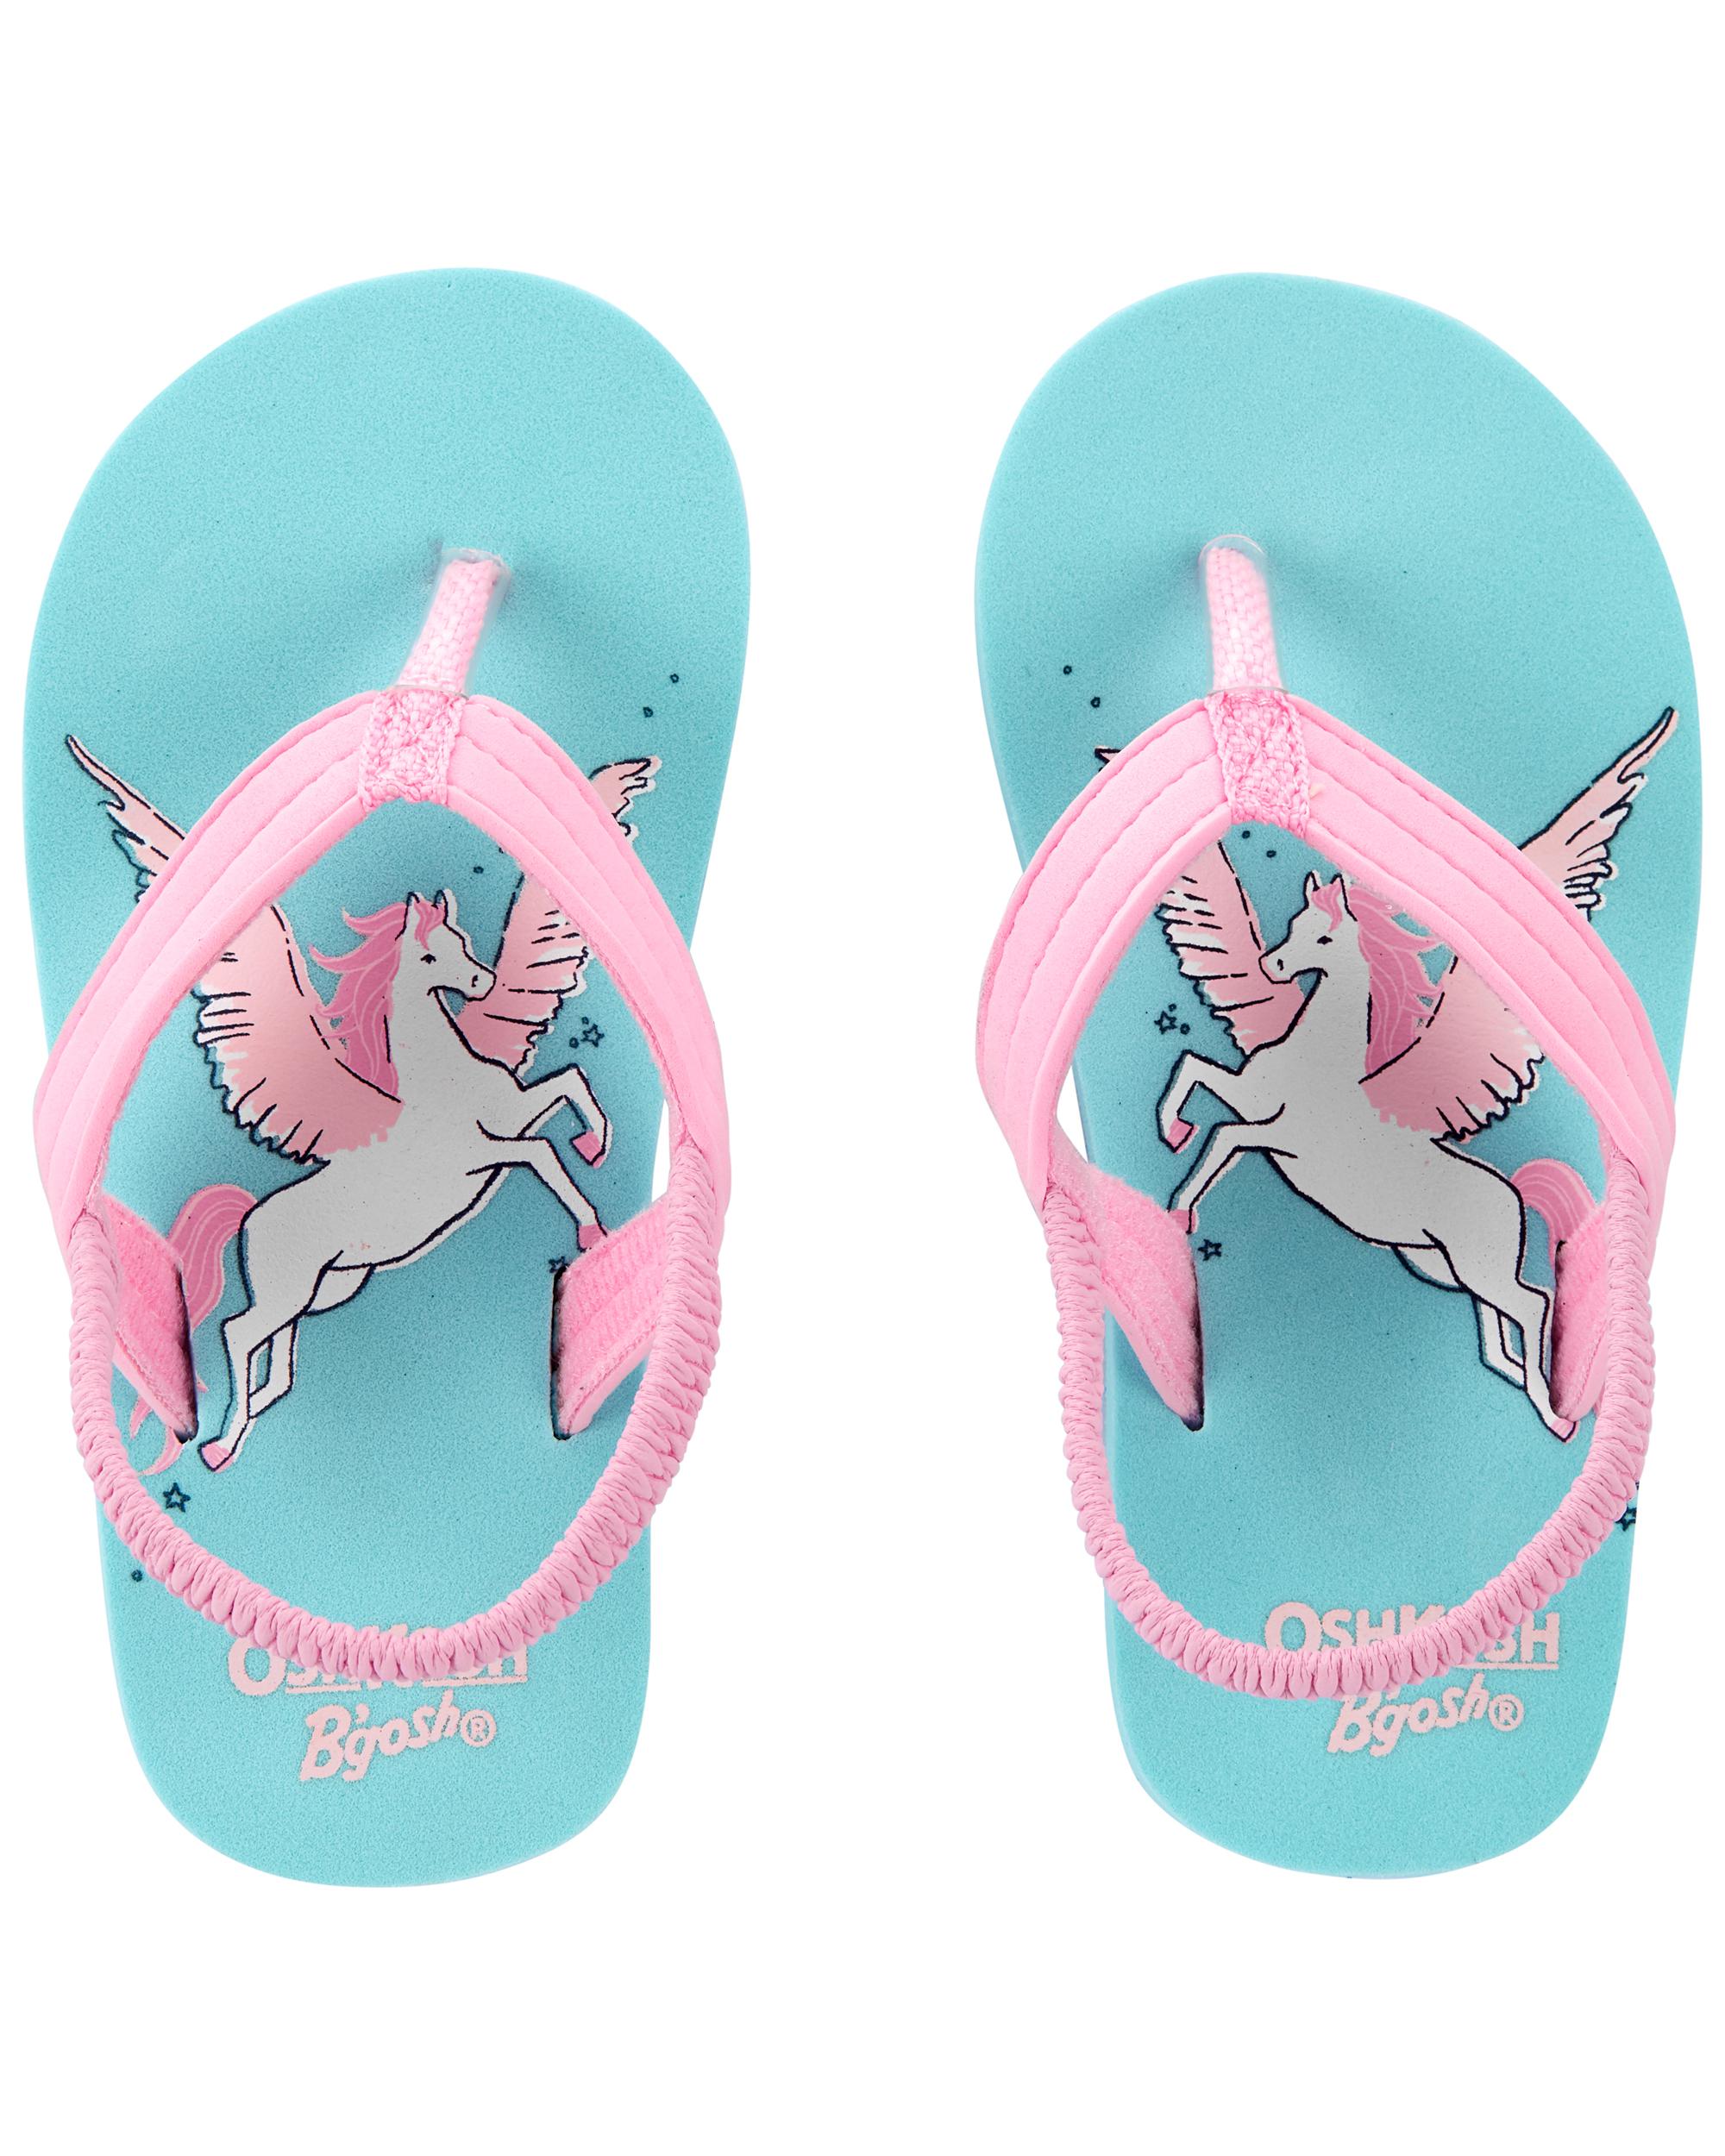 Carter's Kids' Flip Flops (Various Styles) $2.39 or less w/ SD Cashback + Free Shipping